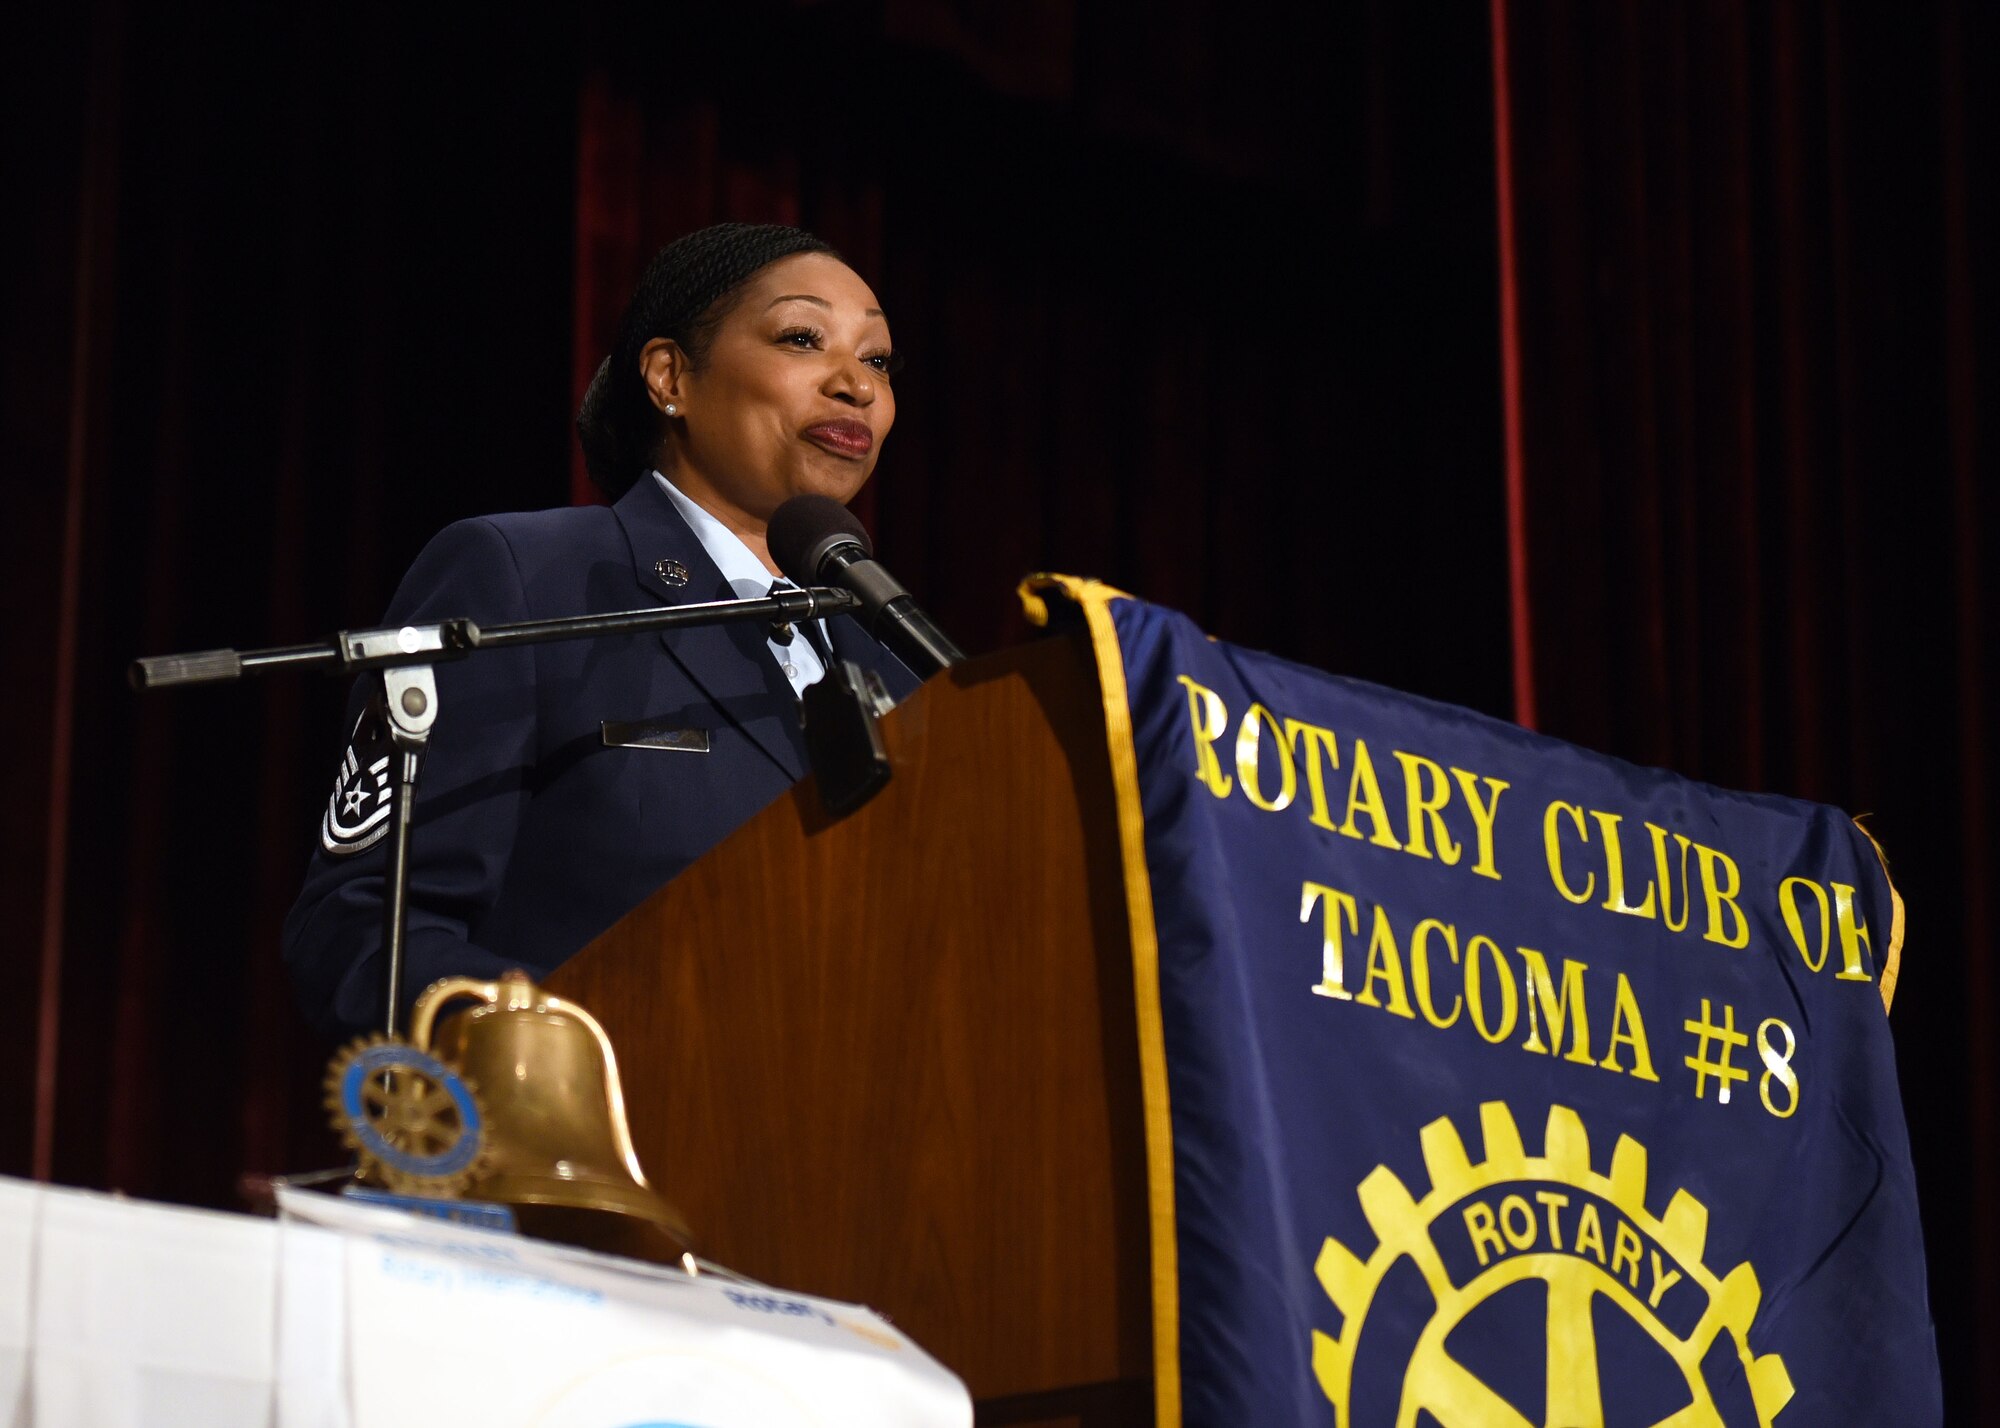 Master Sgt. Monique DuBose, 62nd Airlift Wing Office of the Inspector General superintendent, speaks to members of the Tacoma Rotary Club, fellow service members and veterans, and friends and family after being named the 39th recipient of the John H. Anderson Military Citizen of the Year Award at a luncheon, Nov. 9, 2017 in downtown Tacoma.